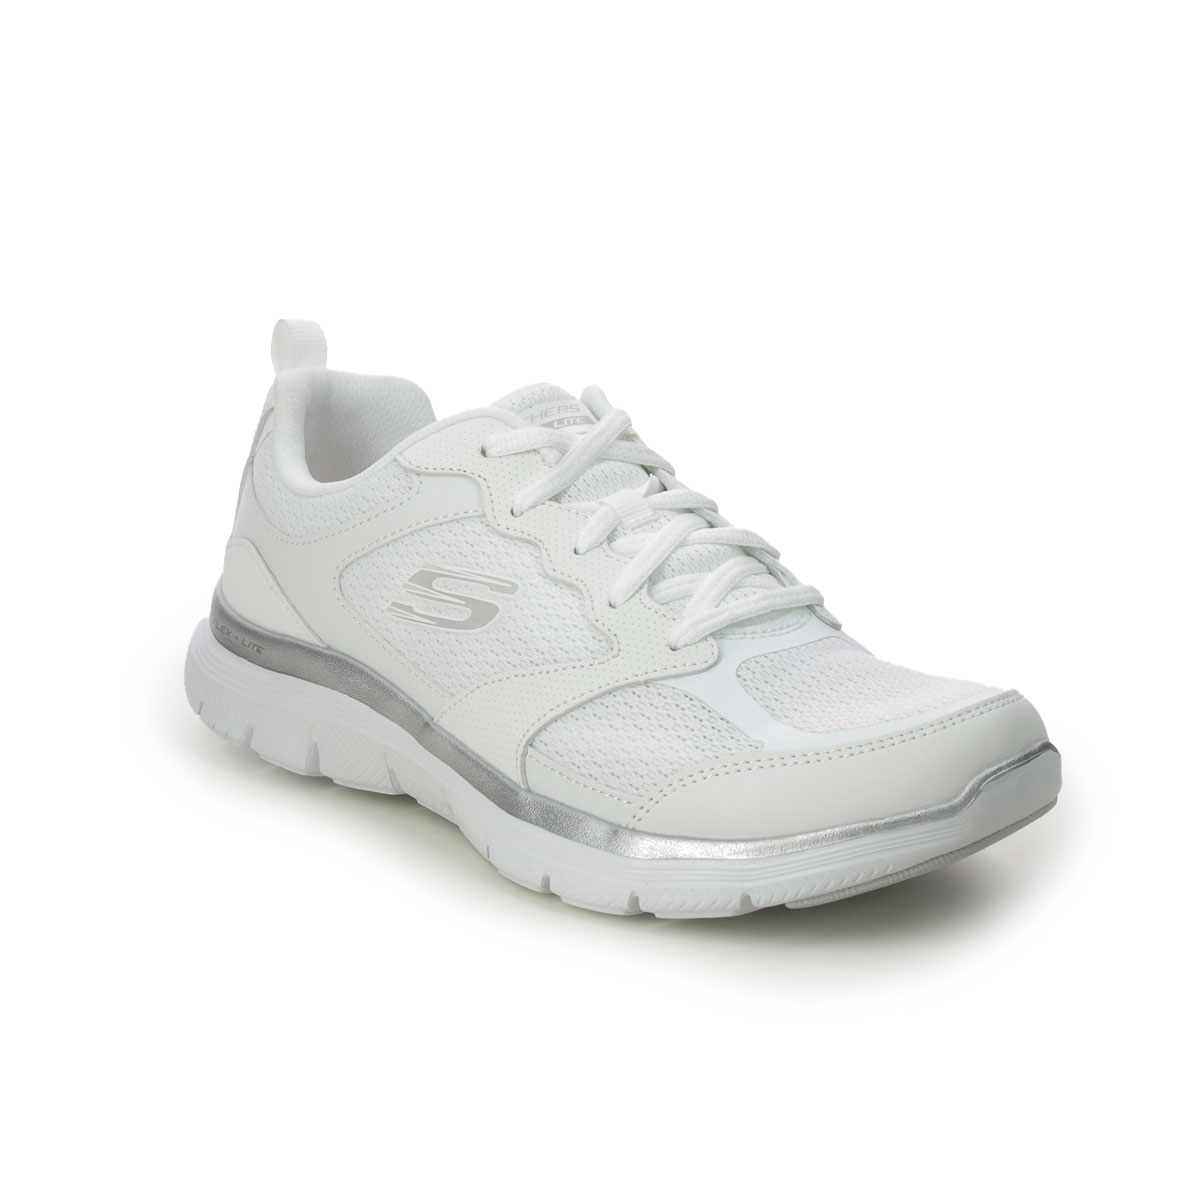 Skechers Flex Appeal 4.0 WHT White Womens trainers 149305 in a Plain Man-made in Size 5